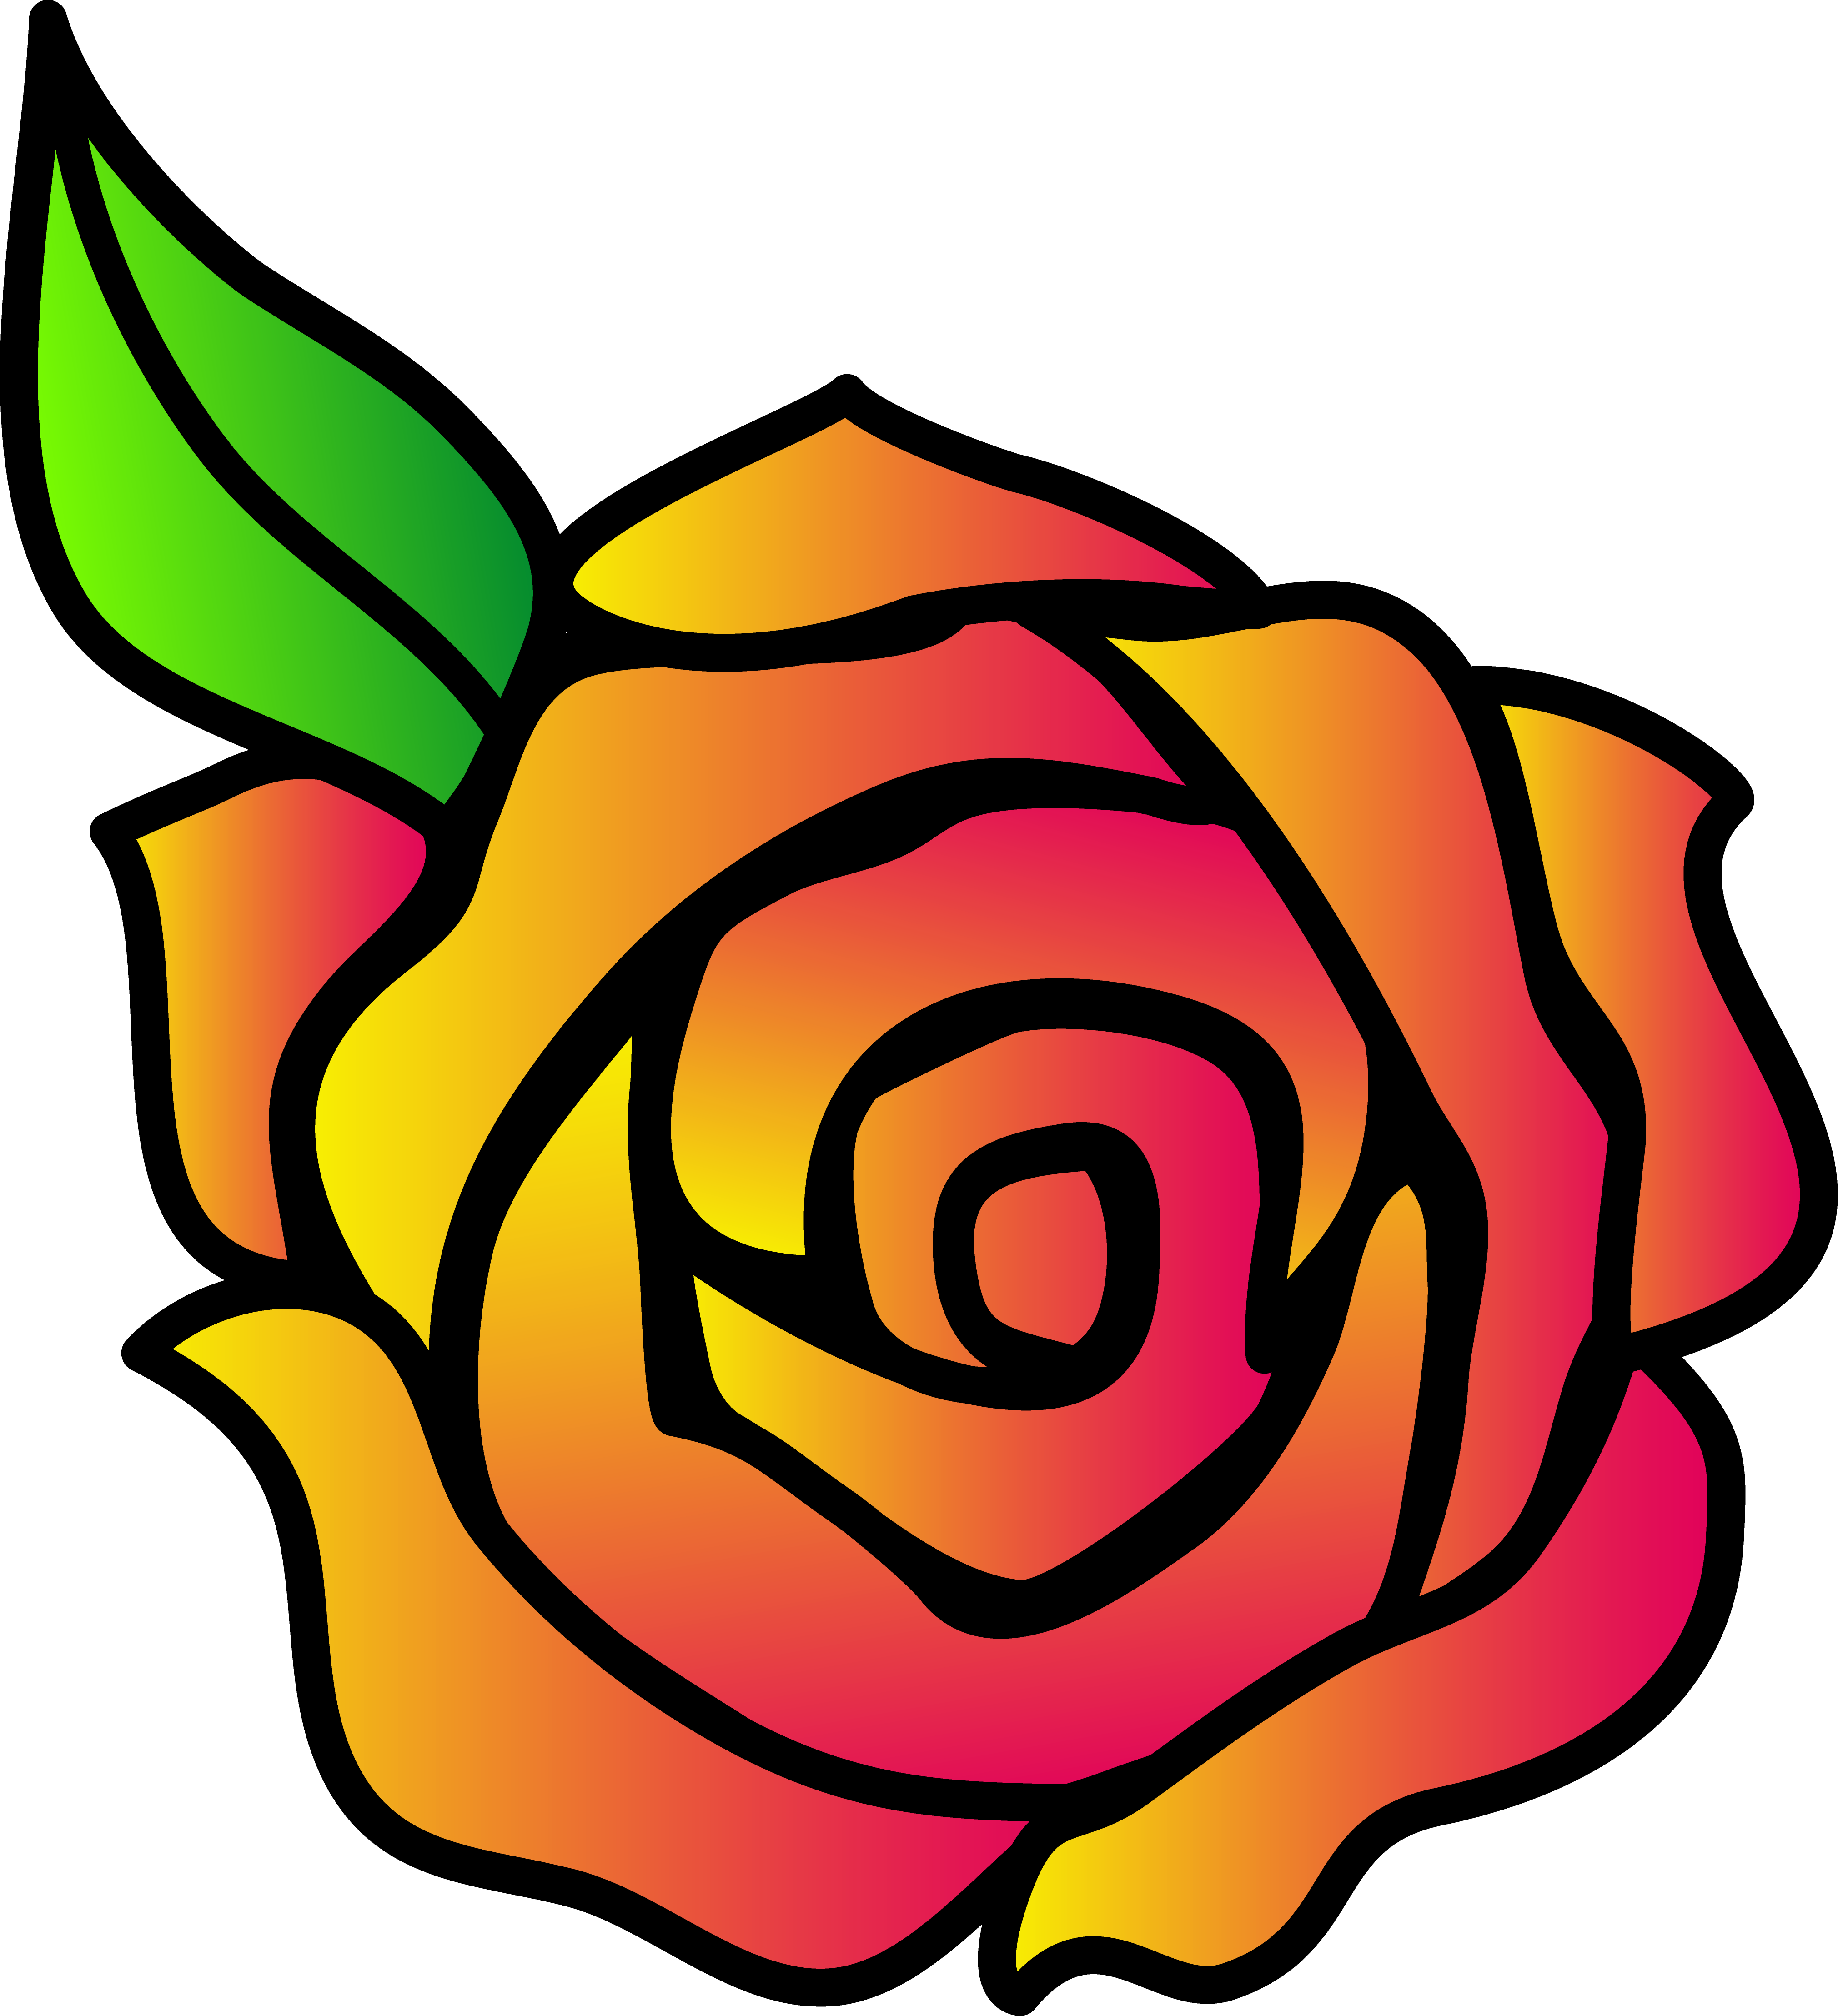 Cartoon Rose Flower Images & Pictures - Becuo